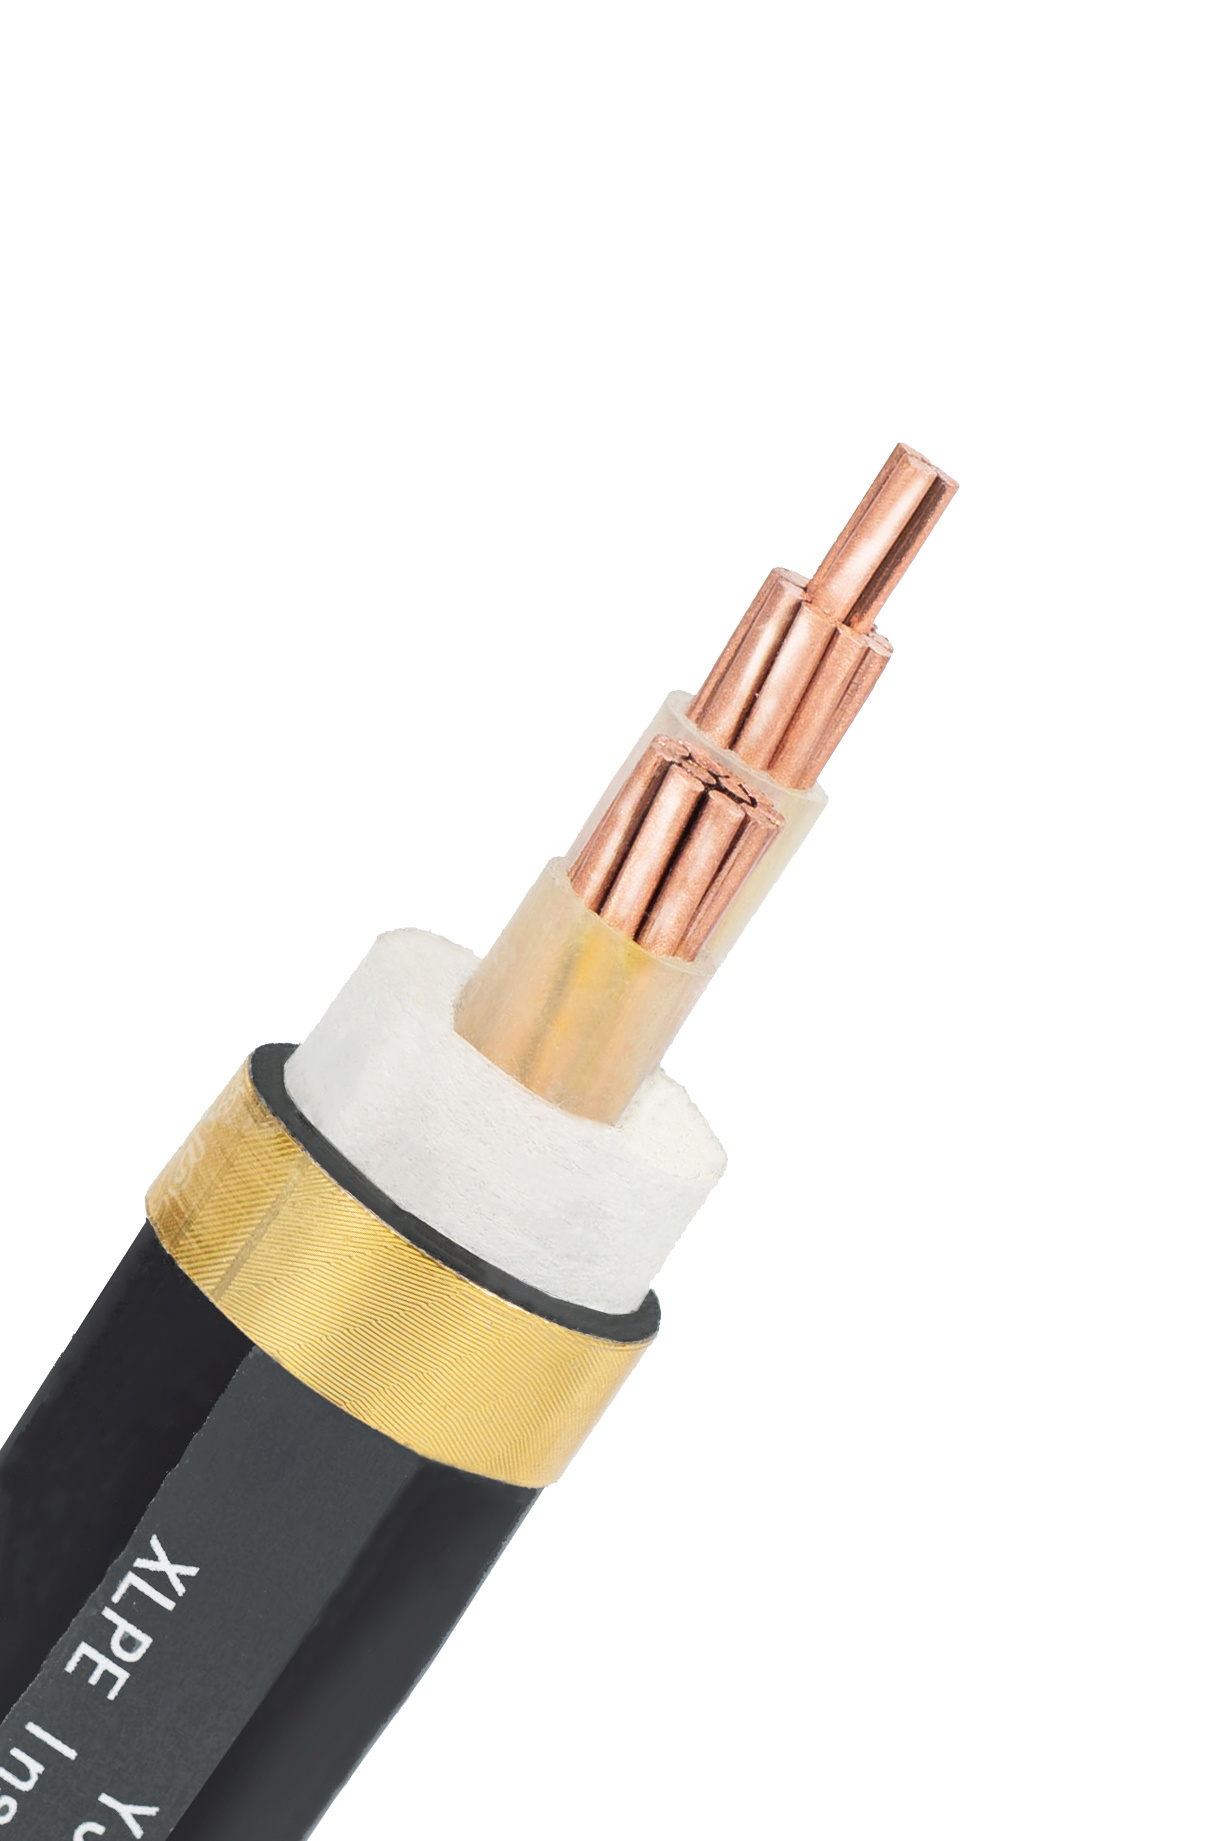 Us Specification XLPE Insulated Electrical Copper Wire and Power Cables